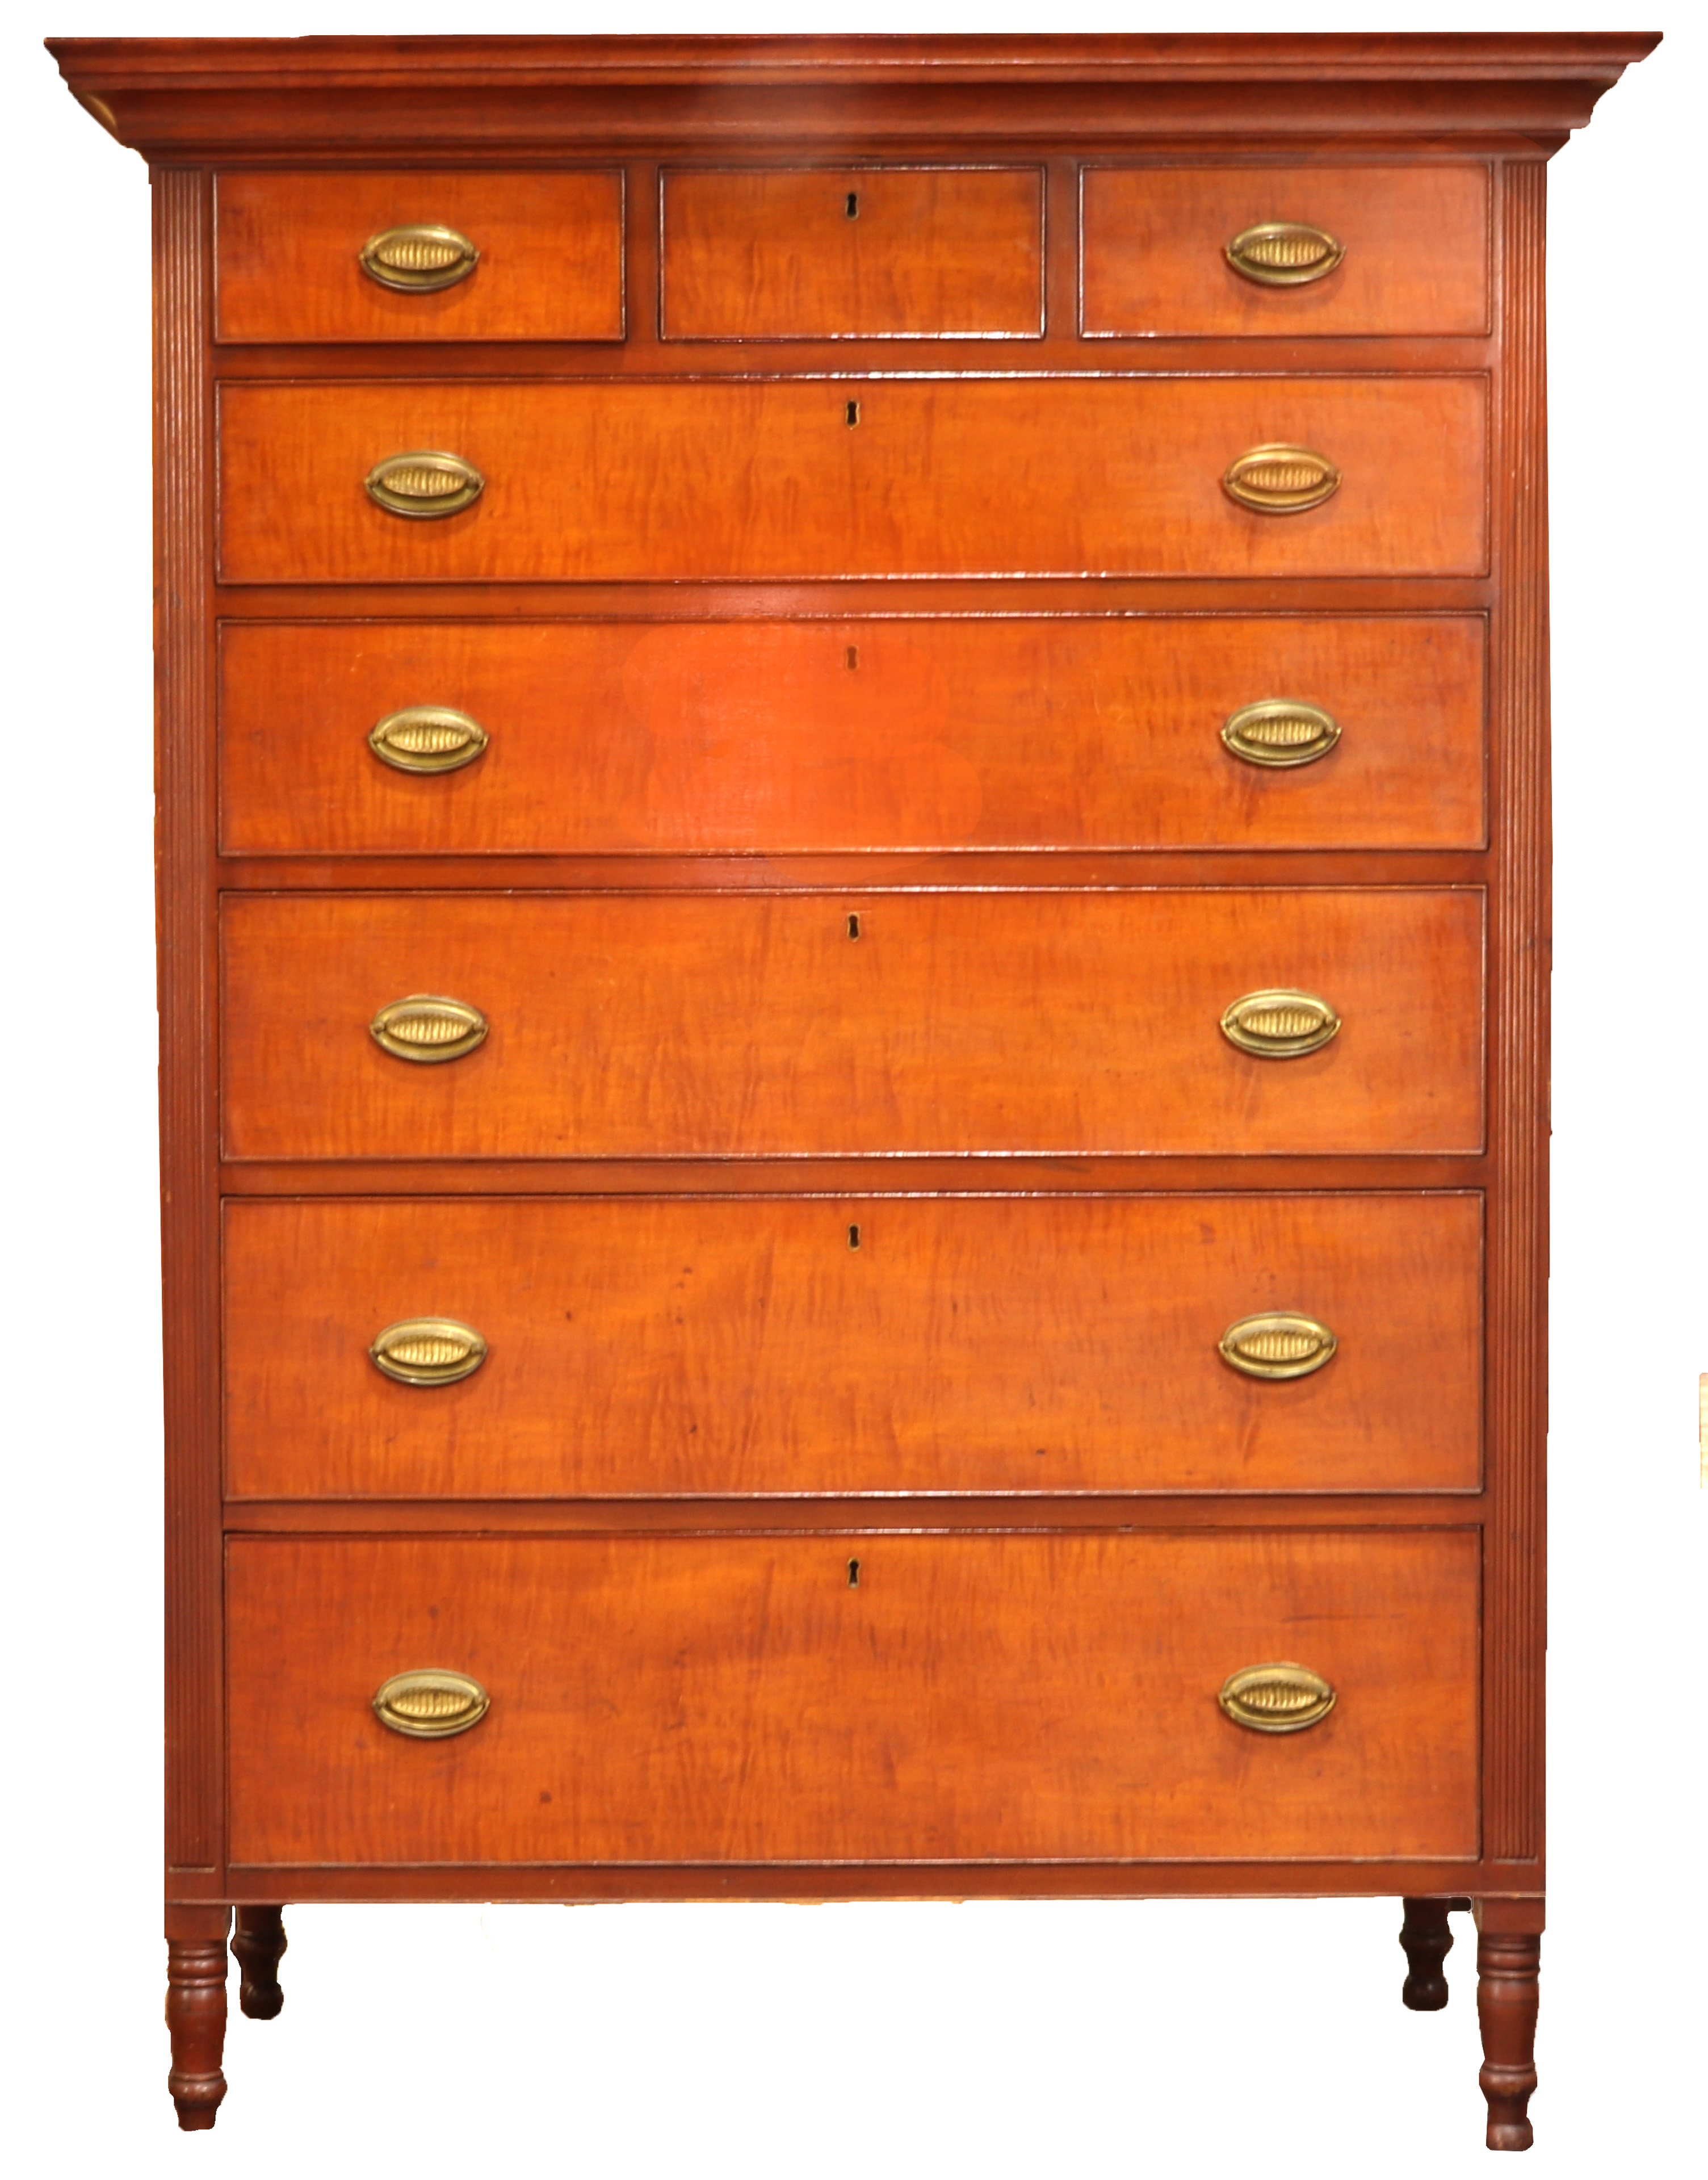 An American Federal cherry chest of drawers - Image 3 of 8